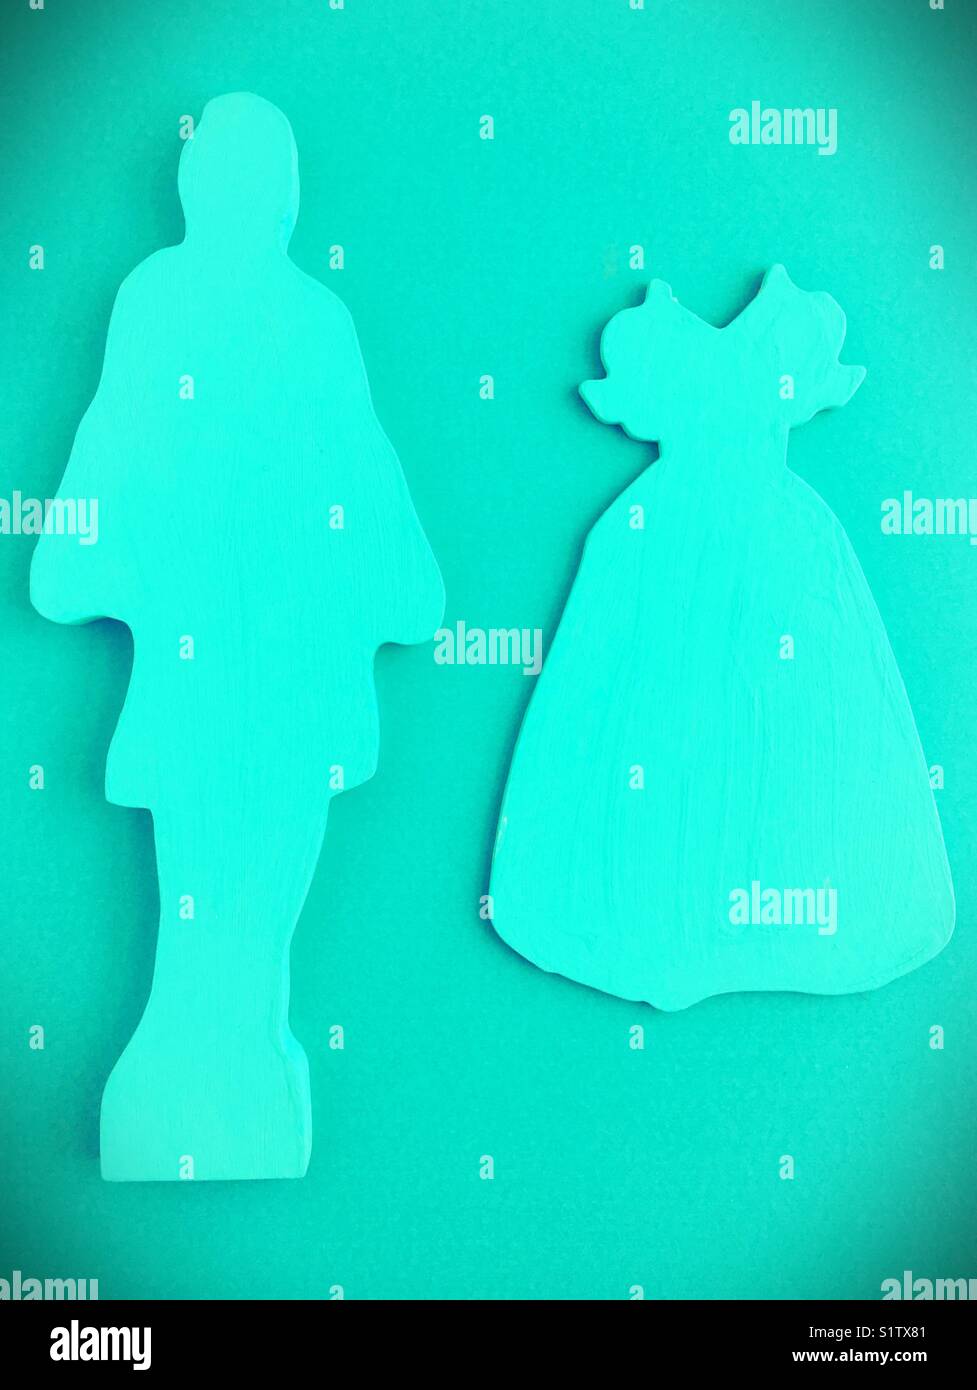 Monochrome cutout figures of a female form and a dress. Stock Photo